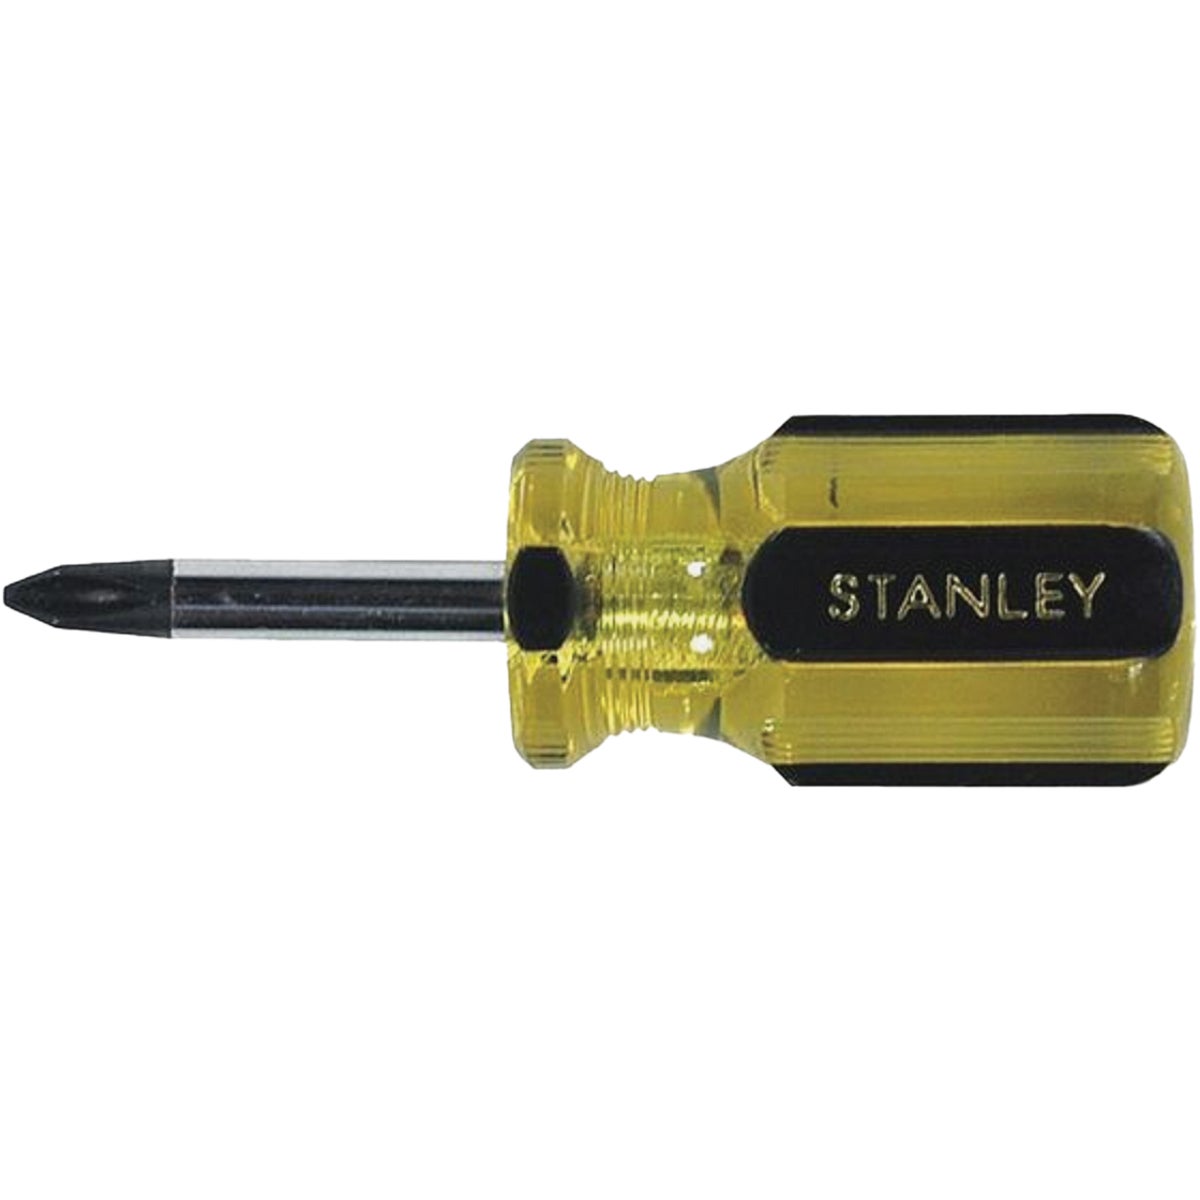 Stanley 100 PLUS #2 x 1-3/16 In. Stubby Phillips Screwdriver w/Blk Oxide Tip